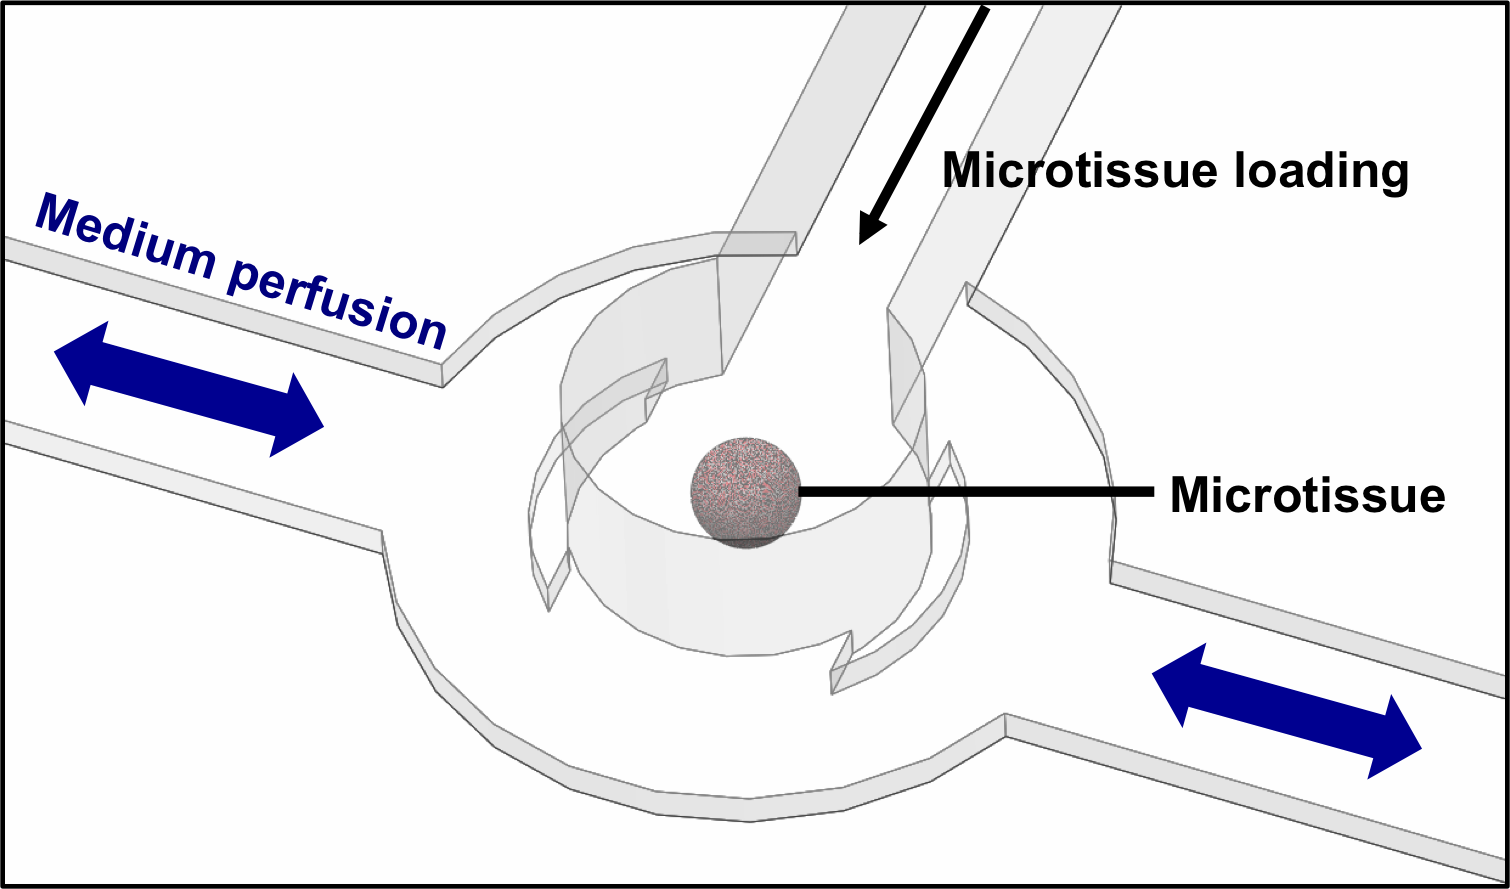 Enlarged view: Microfluidic Microtissue Compartment